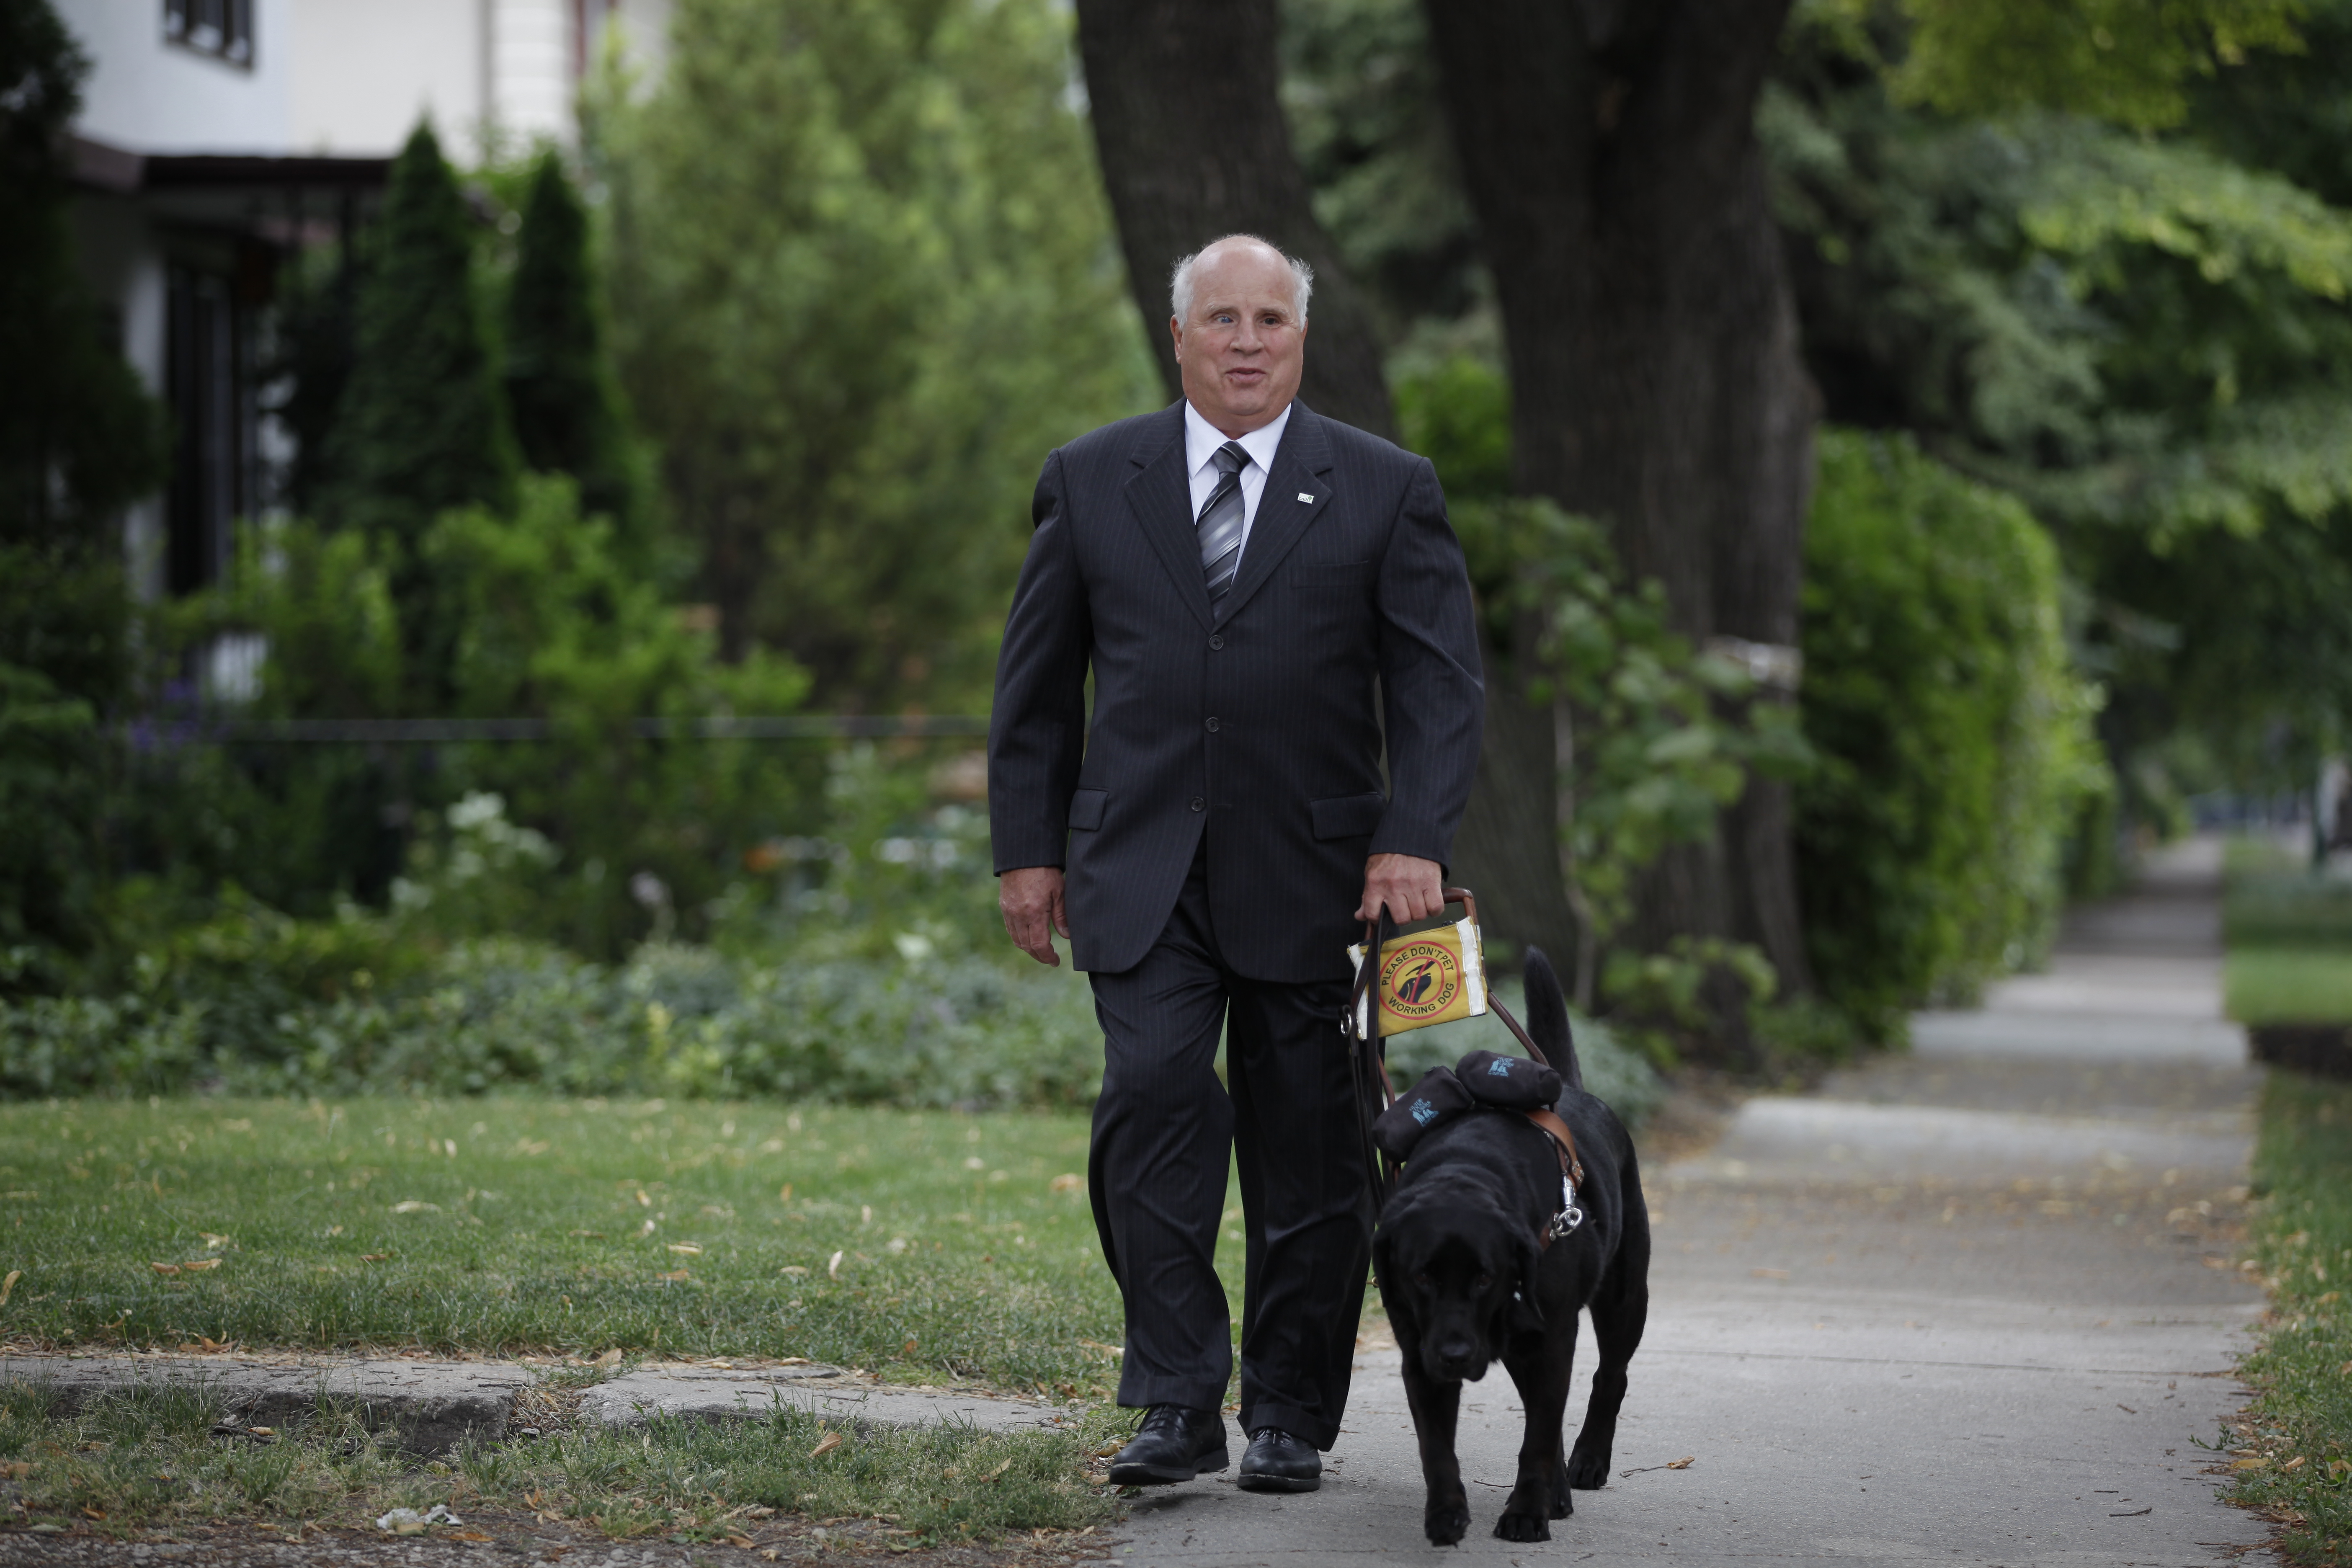 Shep Shell, wearing a black suit, while walking with his guide dog, a Black Labrador.